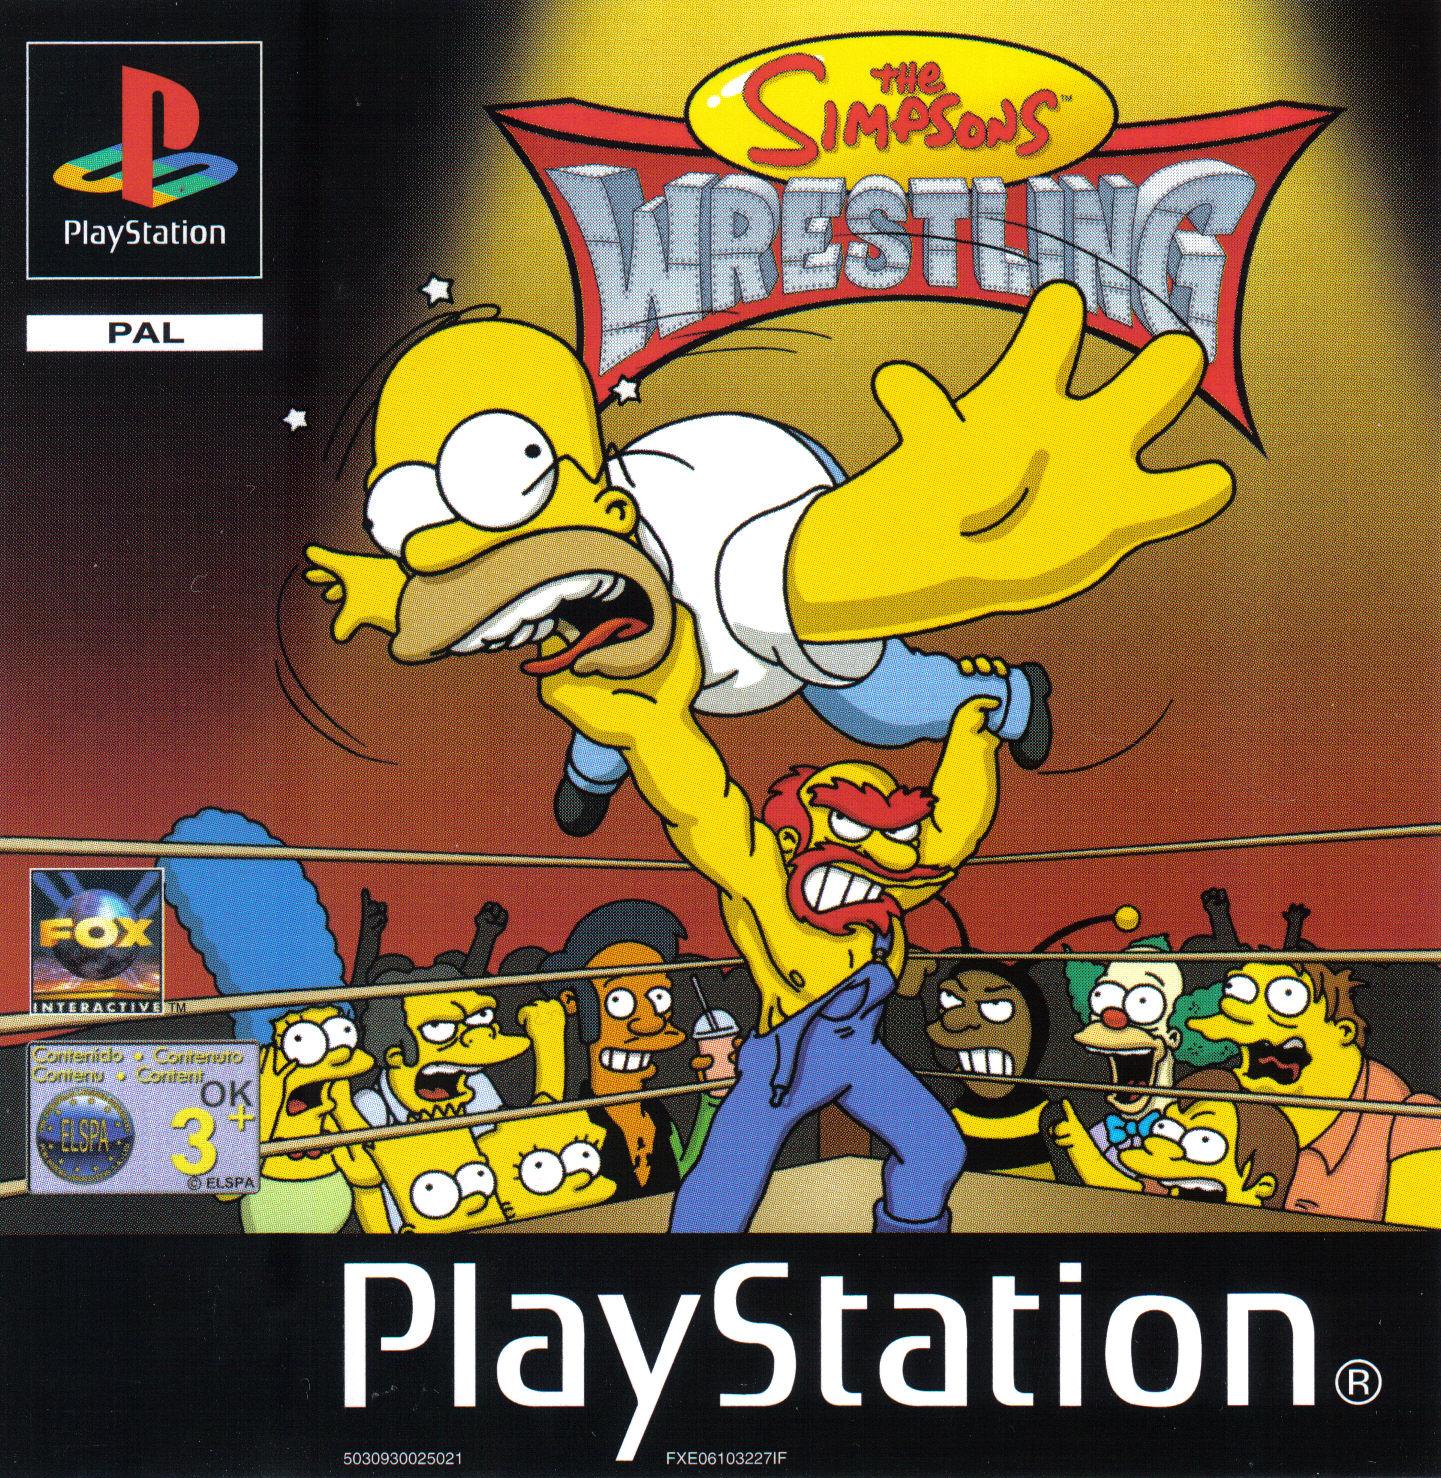 The Simpsons Wrestling Game